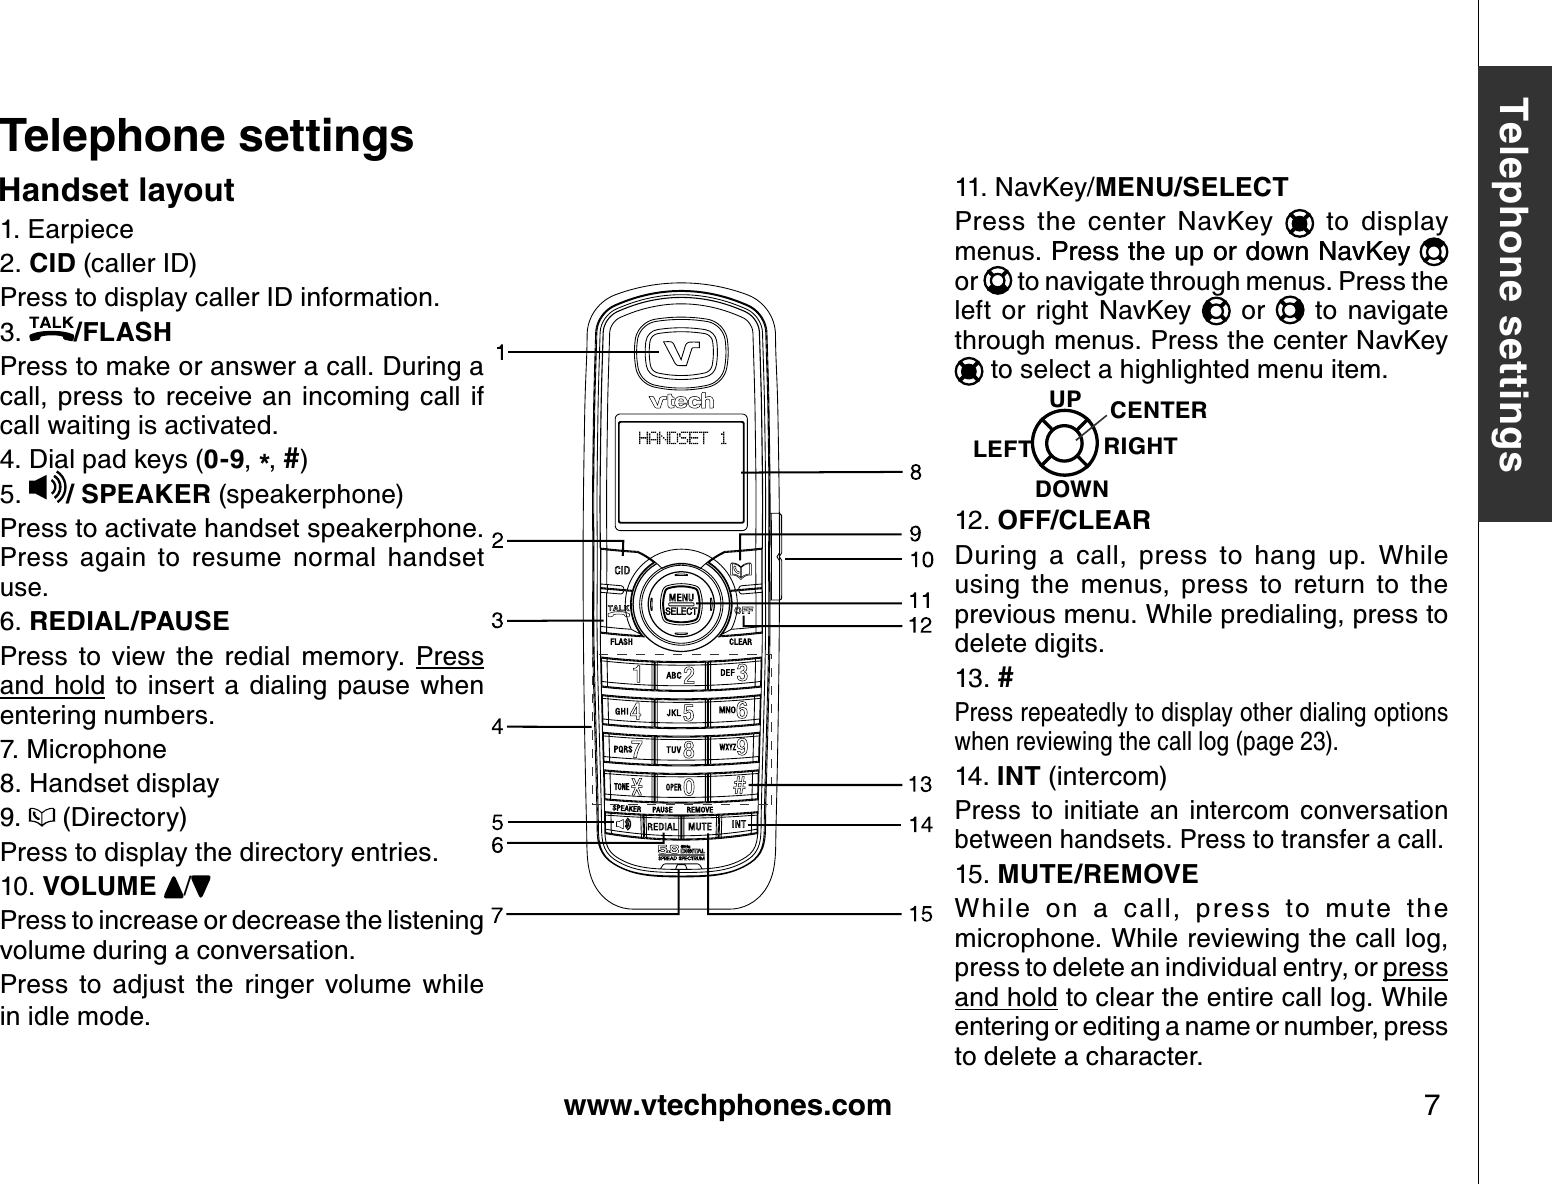 www.vtechphones.com 7Basic operationTelephone settingsTelephone settingsHandset layout1. Earpiece2. CID (caller ID) Press to display caller ID information.3.  /F LASHPress to make or answer a call. During a call, press  to  receive an incoming call  if call waiting is activated.4. Dial pad keys (0 -9,*,#)5.  / SPEAKER (speakerphone)Press to activate handset speakerphone. Press  again  to  resume  normal  handset use.6. REDIAL/PAUSEPress  to  view  the  redial  memory.  Press and hold  to  insert  a dialing  pause when entering numbers.7. Microphone8. Handset display9.   (Directory)Press to display the directory entries.10. VOLUME /Press to increase or decrease the listening volume during a conversation.Press  to  adjust  the  ringer  volume  while in idle mode.11. NavKey/MENU/SELECTPress  the  center  NavKey    to  display menus. Press the up or down NavKeyPress the up or down NavKey or   to navigate through menus. Press the left  or  right  NavKey    or    to  navigate through menus. Press the center NavKey  to select a highlighted menu item.12. OF F /CLEARDuring  a  call,  press  to  hang  up.  While using  the  menus,  press  to  return  to  the previous menu. While predialing, press to delete digits.13. #Press repeatedly to display other dialing options when reviewing the call log (page 23).14. INT (intercom)Press  to  initiate  an  intercom  conversation between handsets. Press to transfer a call.15. MUTE/REMOVEWhile  on  a  call,  press  to  mute  the microphone. While reviewing the call log, press to delete an individual entry, or press and hold to clear the entire call log. While entering or editing a name or number, press to delete a character.CENTERDOWNUPLEF T RIG HT